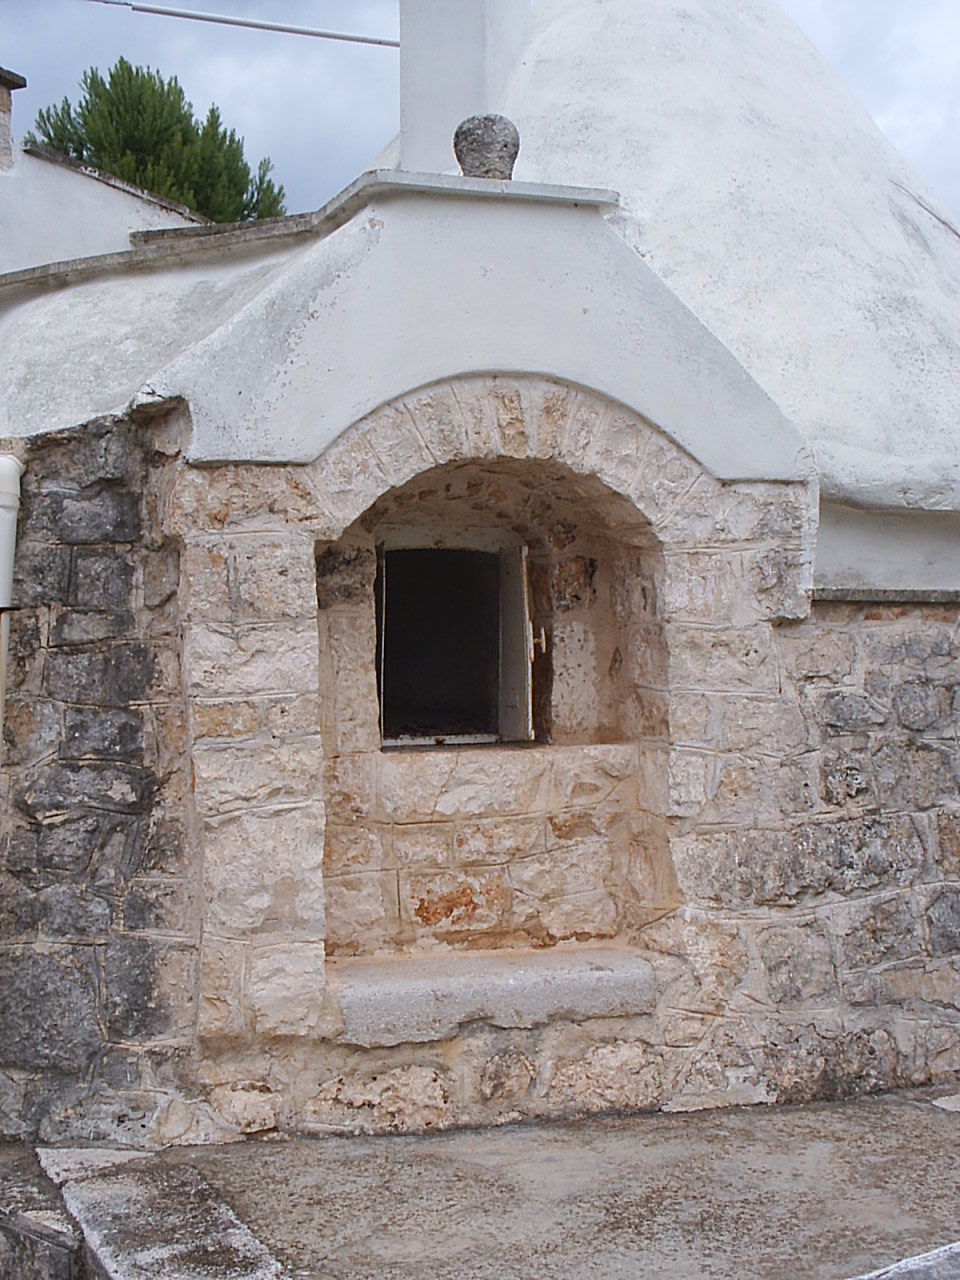 an outdoor shelter with a stone built in window